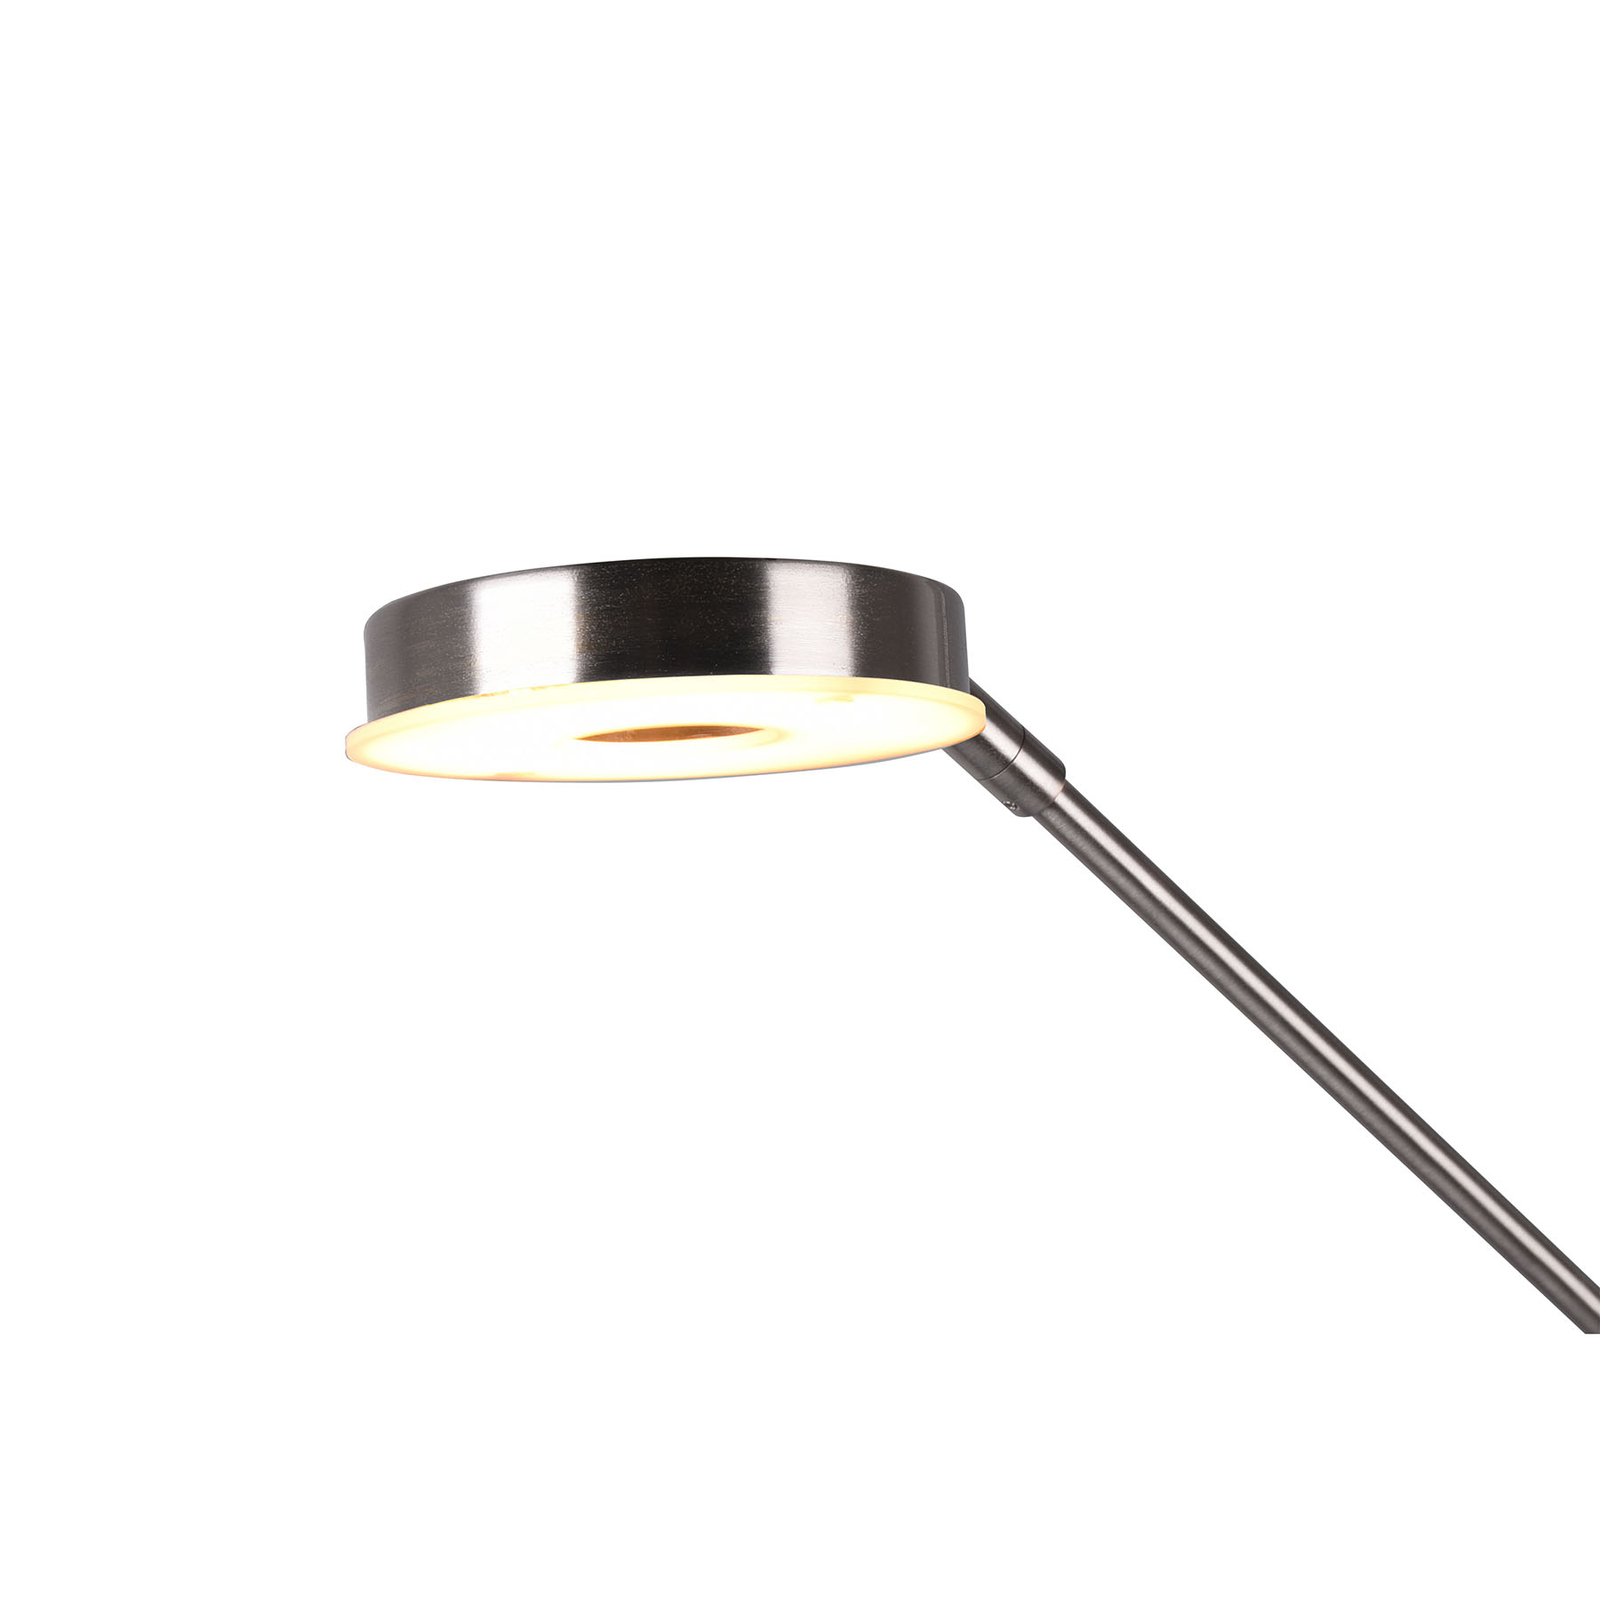 Lampadaire indirect LED Barrie liseuse, nickel mat